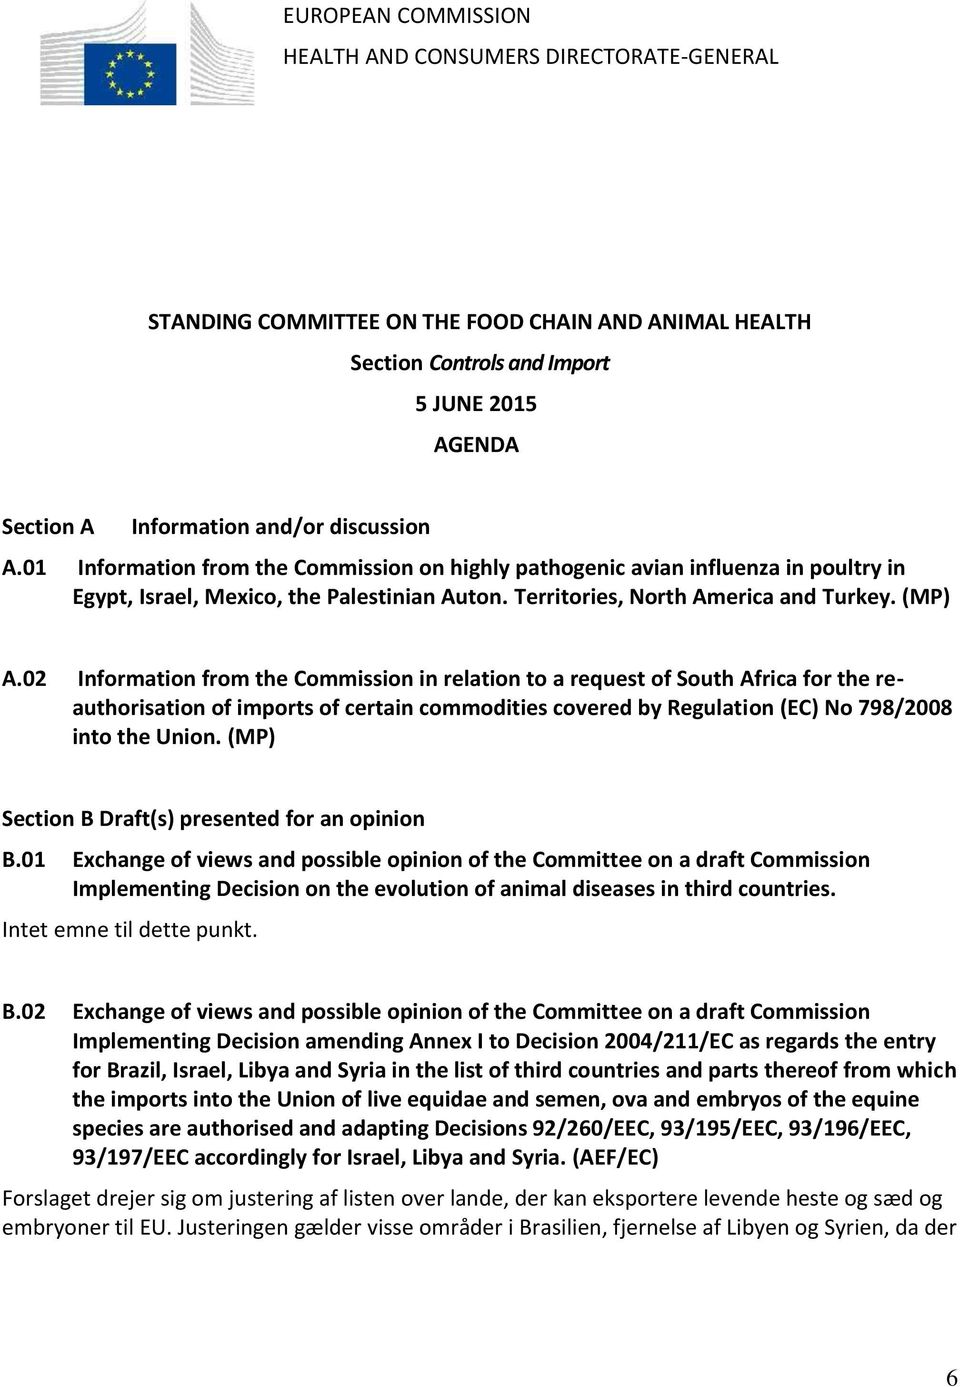 02 Information from the Commission in relation to a request of South Africa for the reauthorisation of imports of certain commodities covered by Regulation (EC) No 798/2008 into the Union.